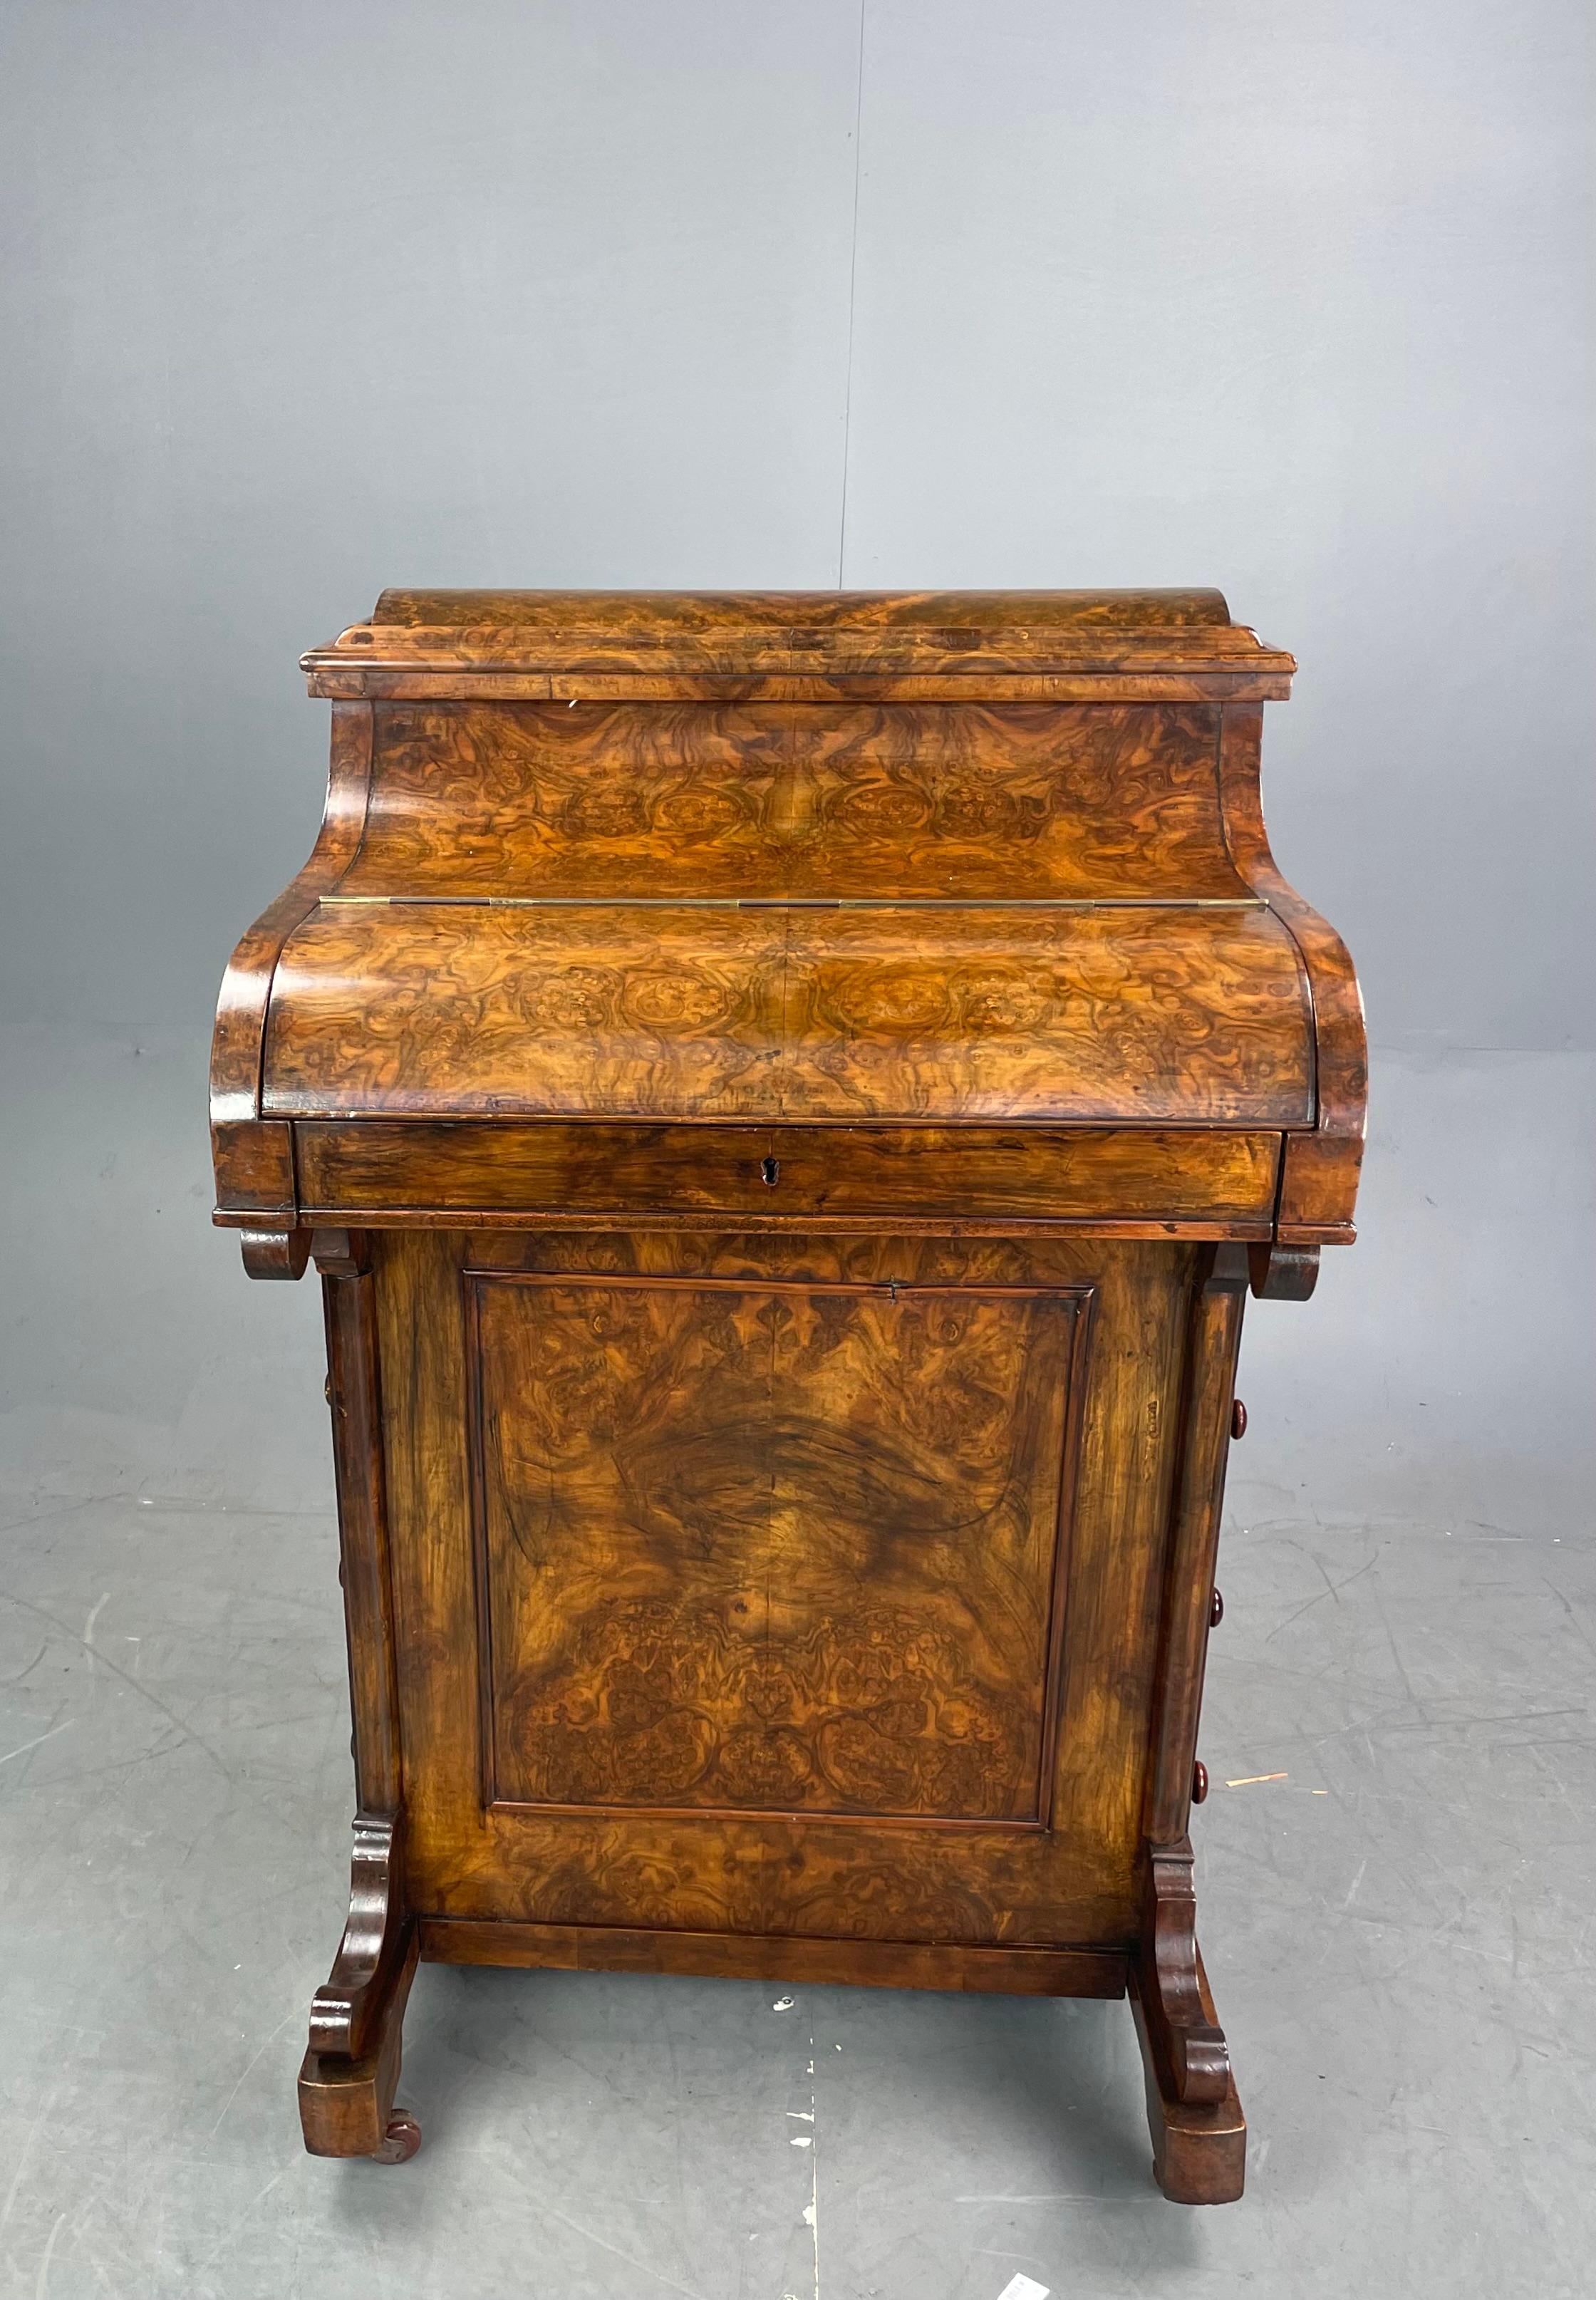 Victorian burr walnut pop up Davenport.
The Davenport has a slide out writing surface with original Moroccan leather insert .with stationary storage underneath with a pen slide .revealing the secret lever to activate the pop up stationary box